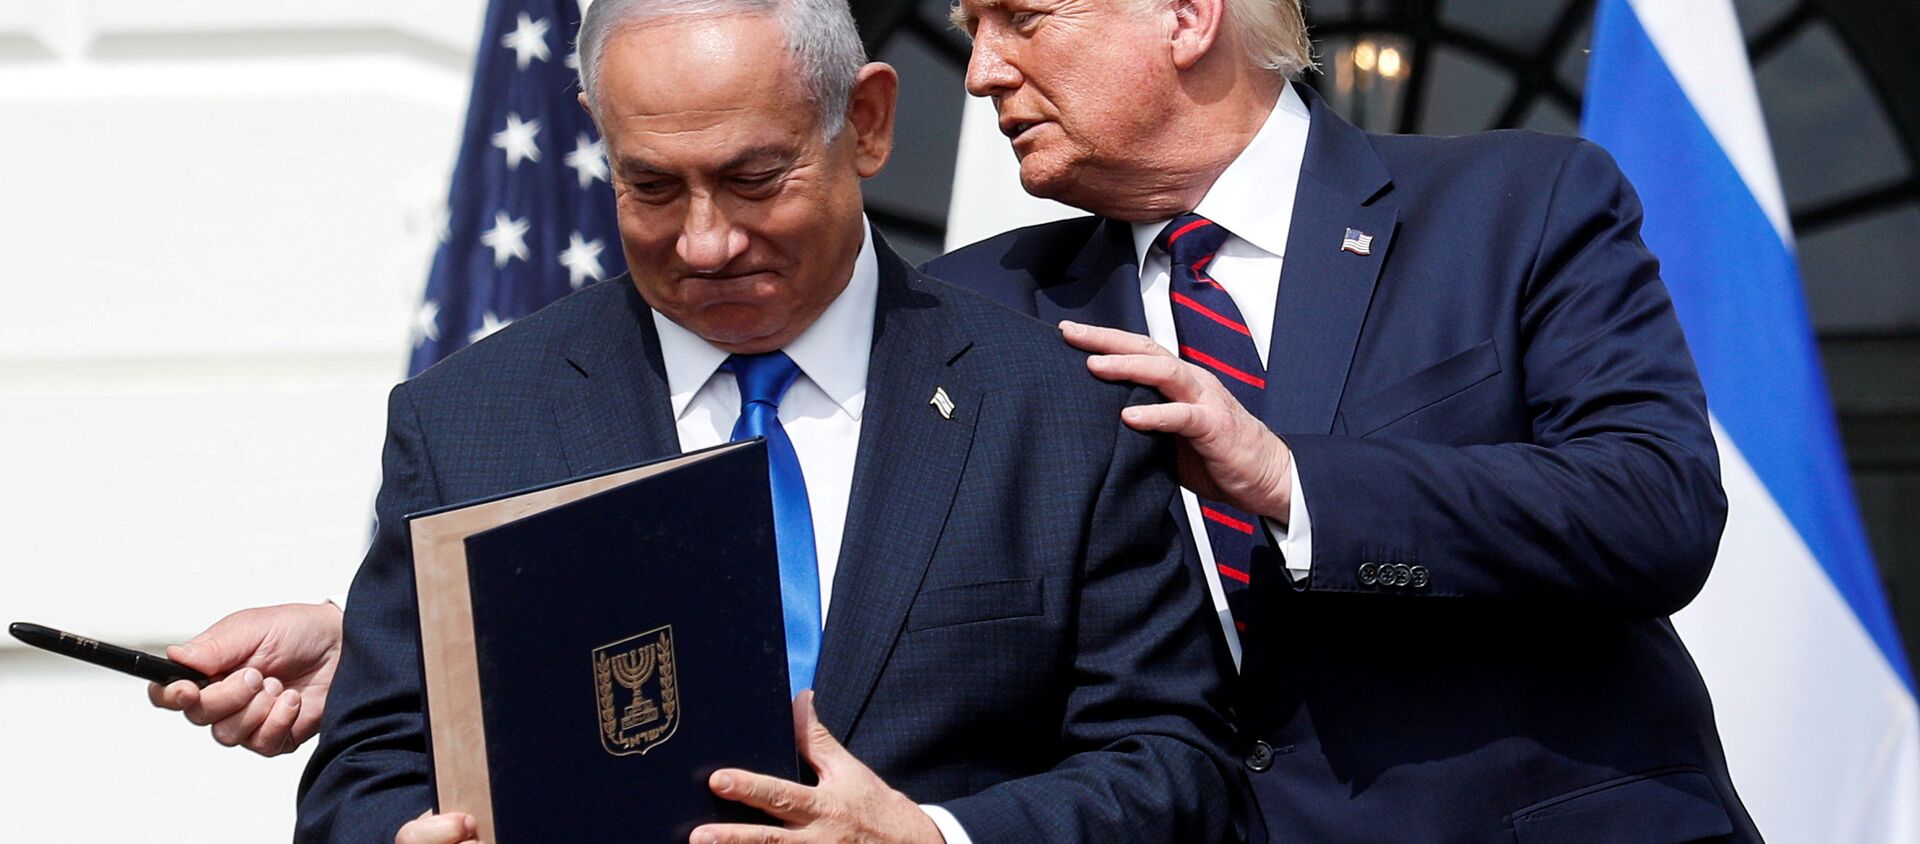 Israel's Prime Minister Benjamin Netanyahu stands with U.S. President Donald Trump after signing the Abraham Accords, normalizing relations between Israel and some of its Middle East neighbors,  in a strategic realignment of Middle Eastern countries against Iran, on the South Lawn of the White House in Washington, U.S., September 15, 2020. - Sputnik International, 1920, 08.07.2021